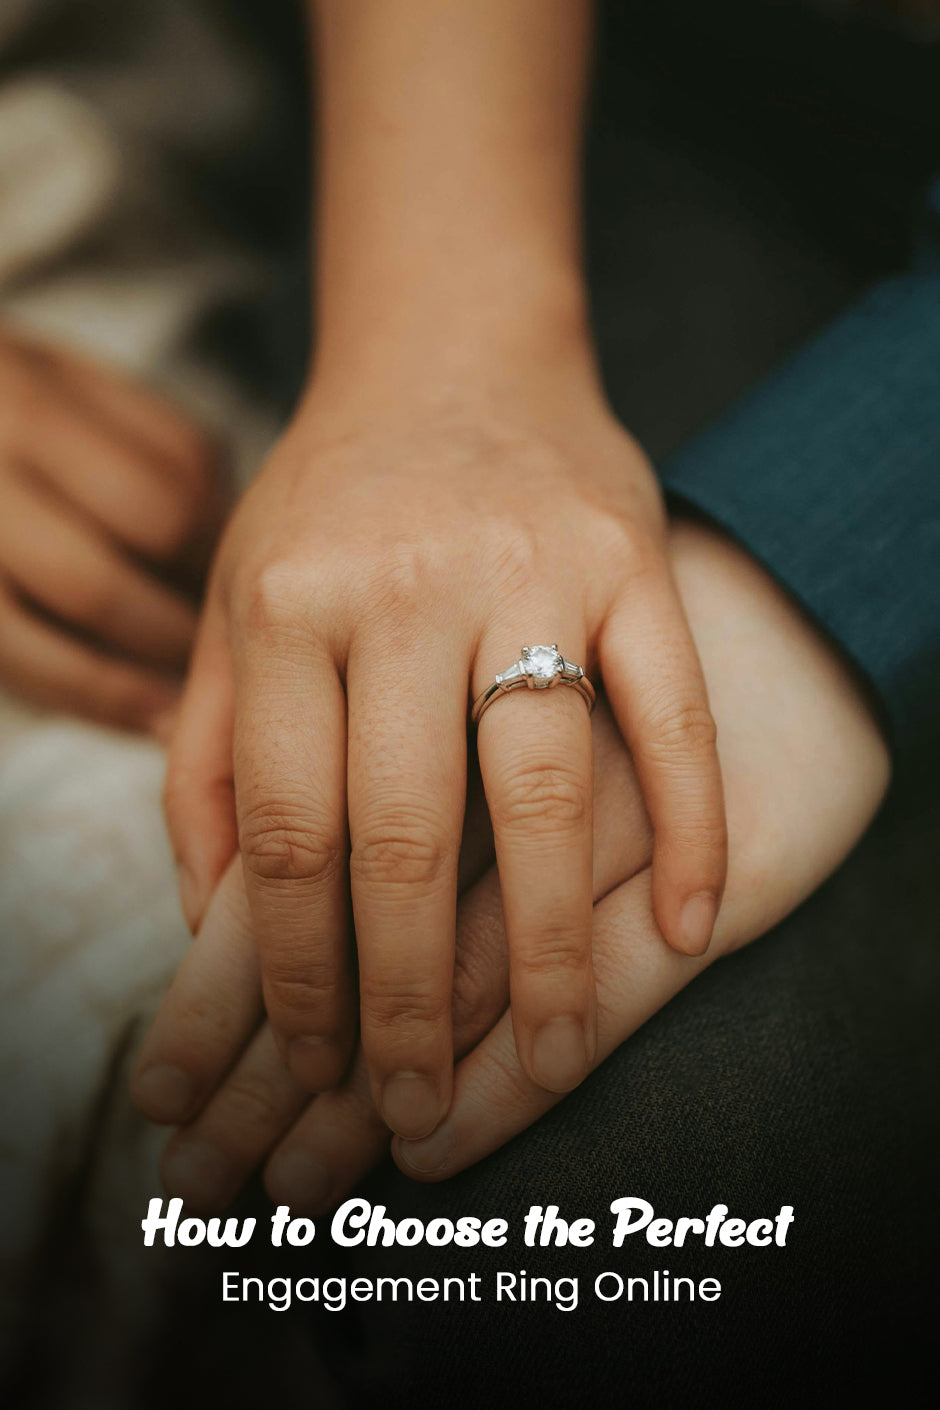 How to Choose the Perfect Engagement Ring Online